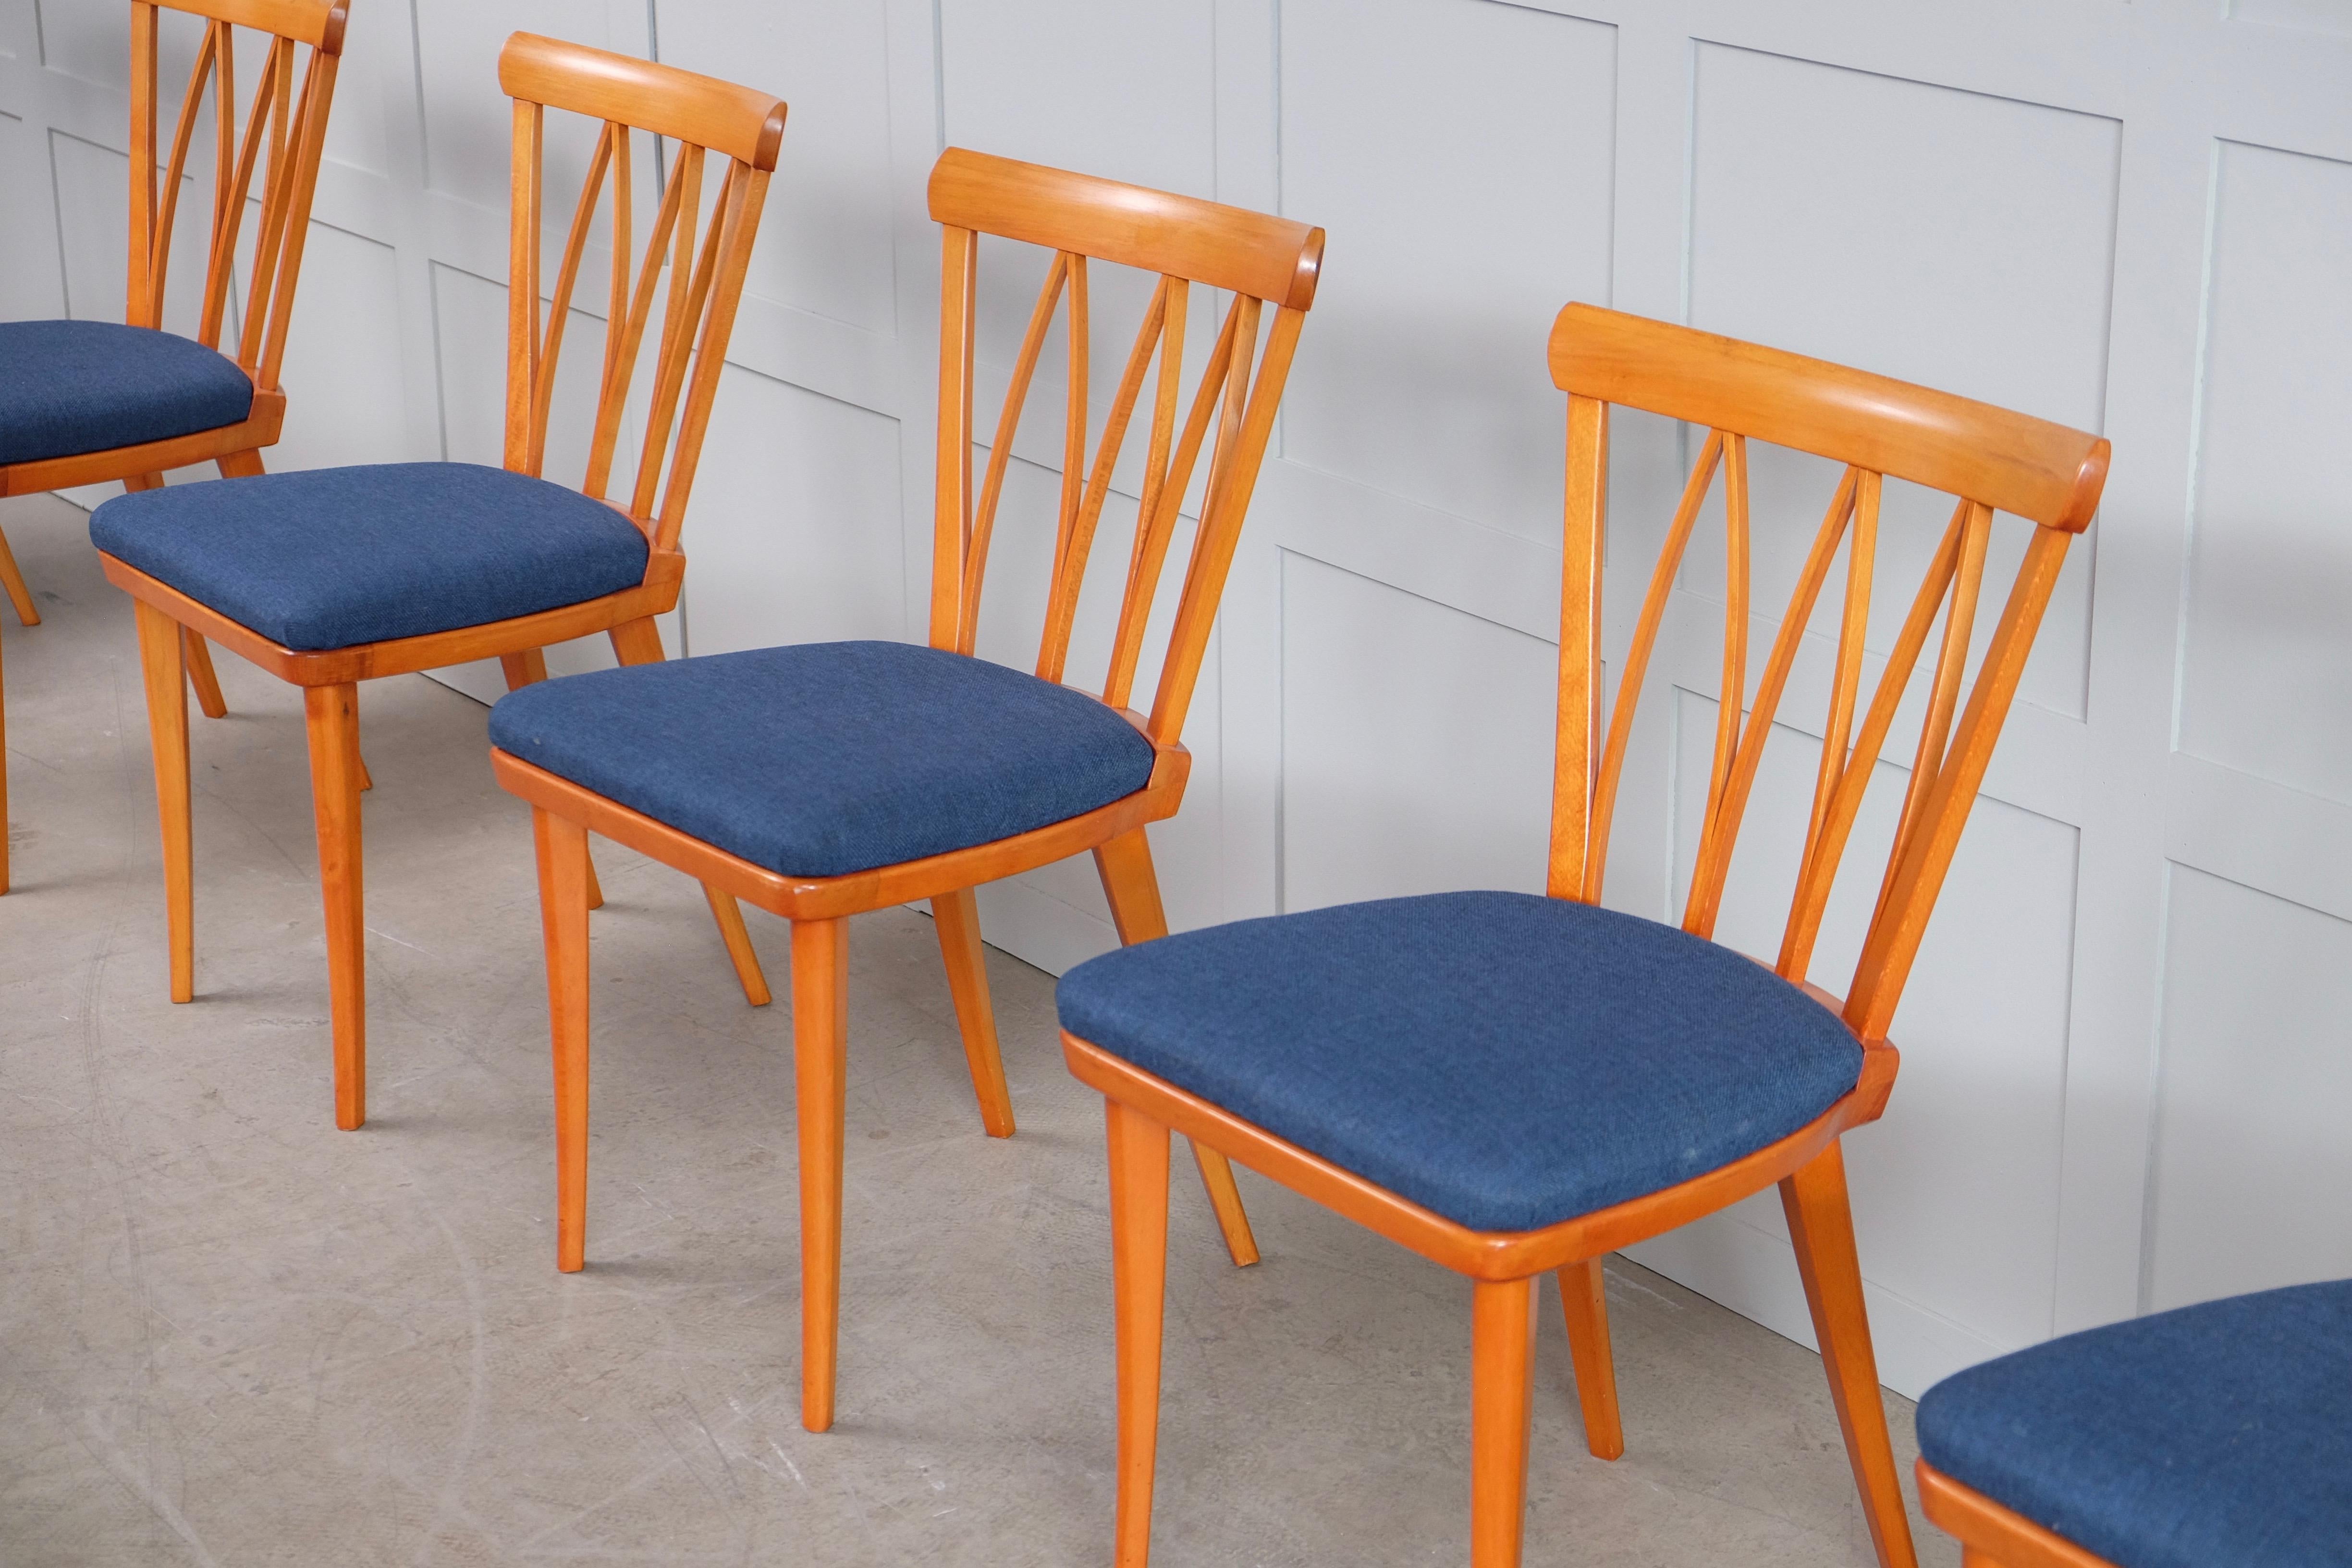 Set of 6 Pyramid dining chairs designed by Carl Malmsten.
Very good condition. Signed.
Global front door shipping: €799.